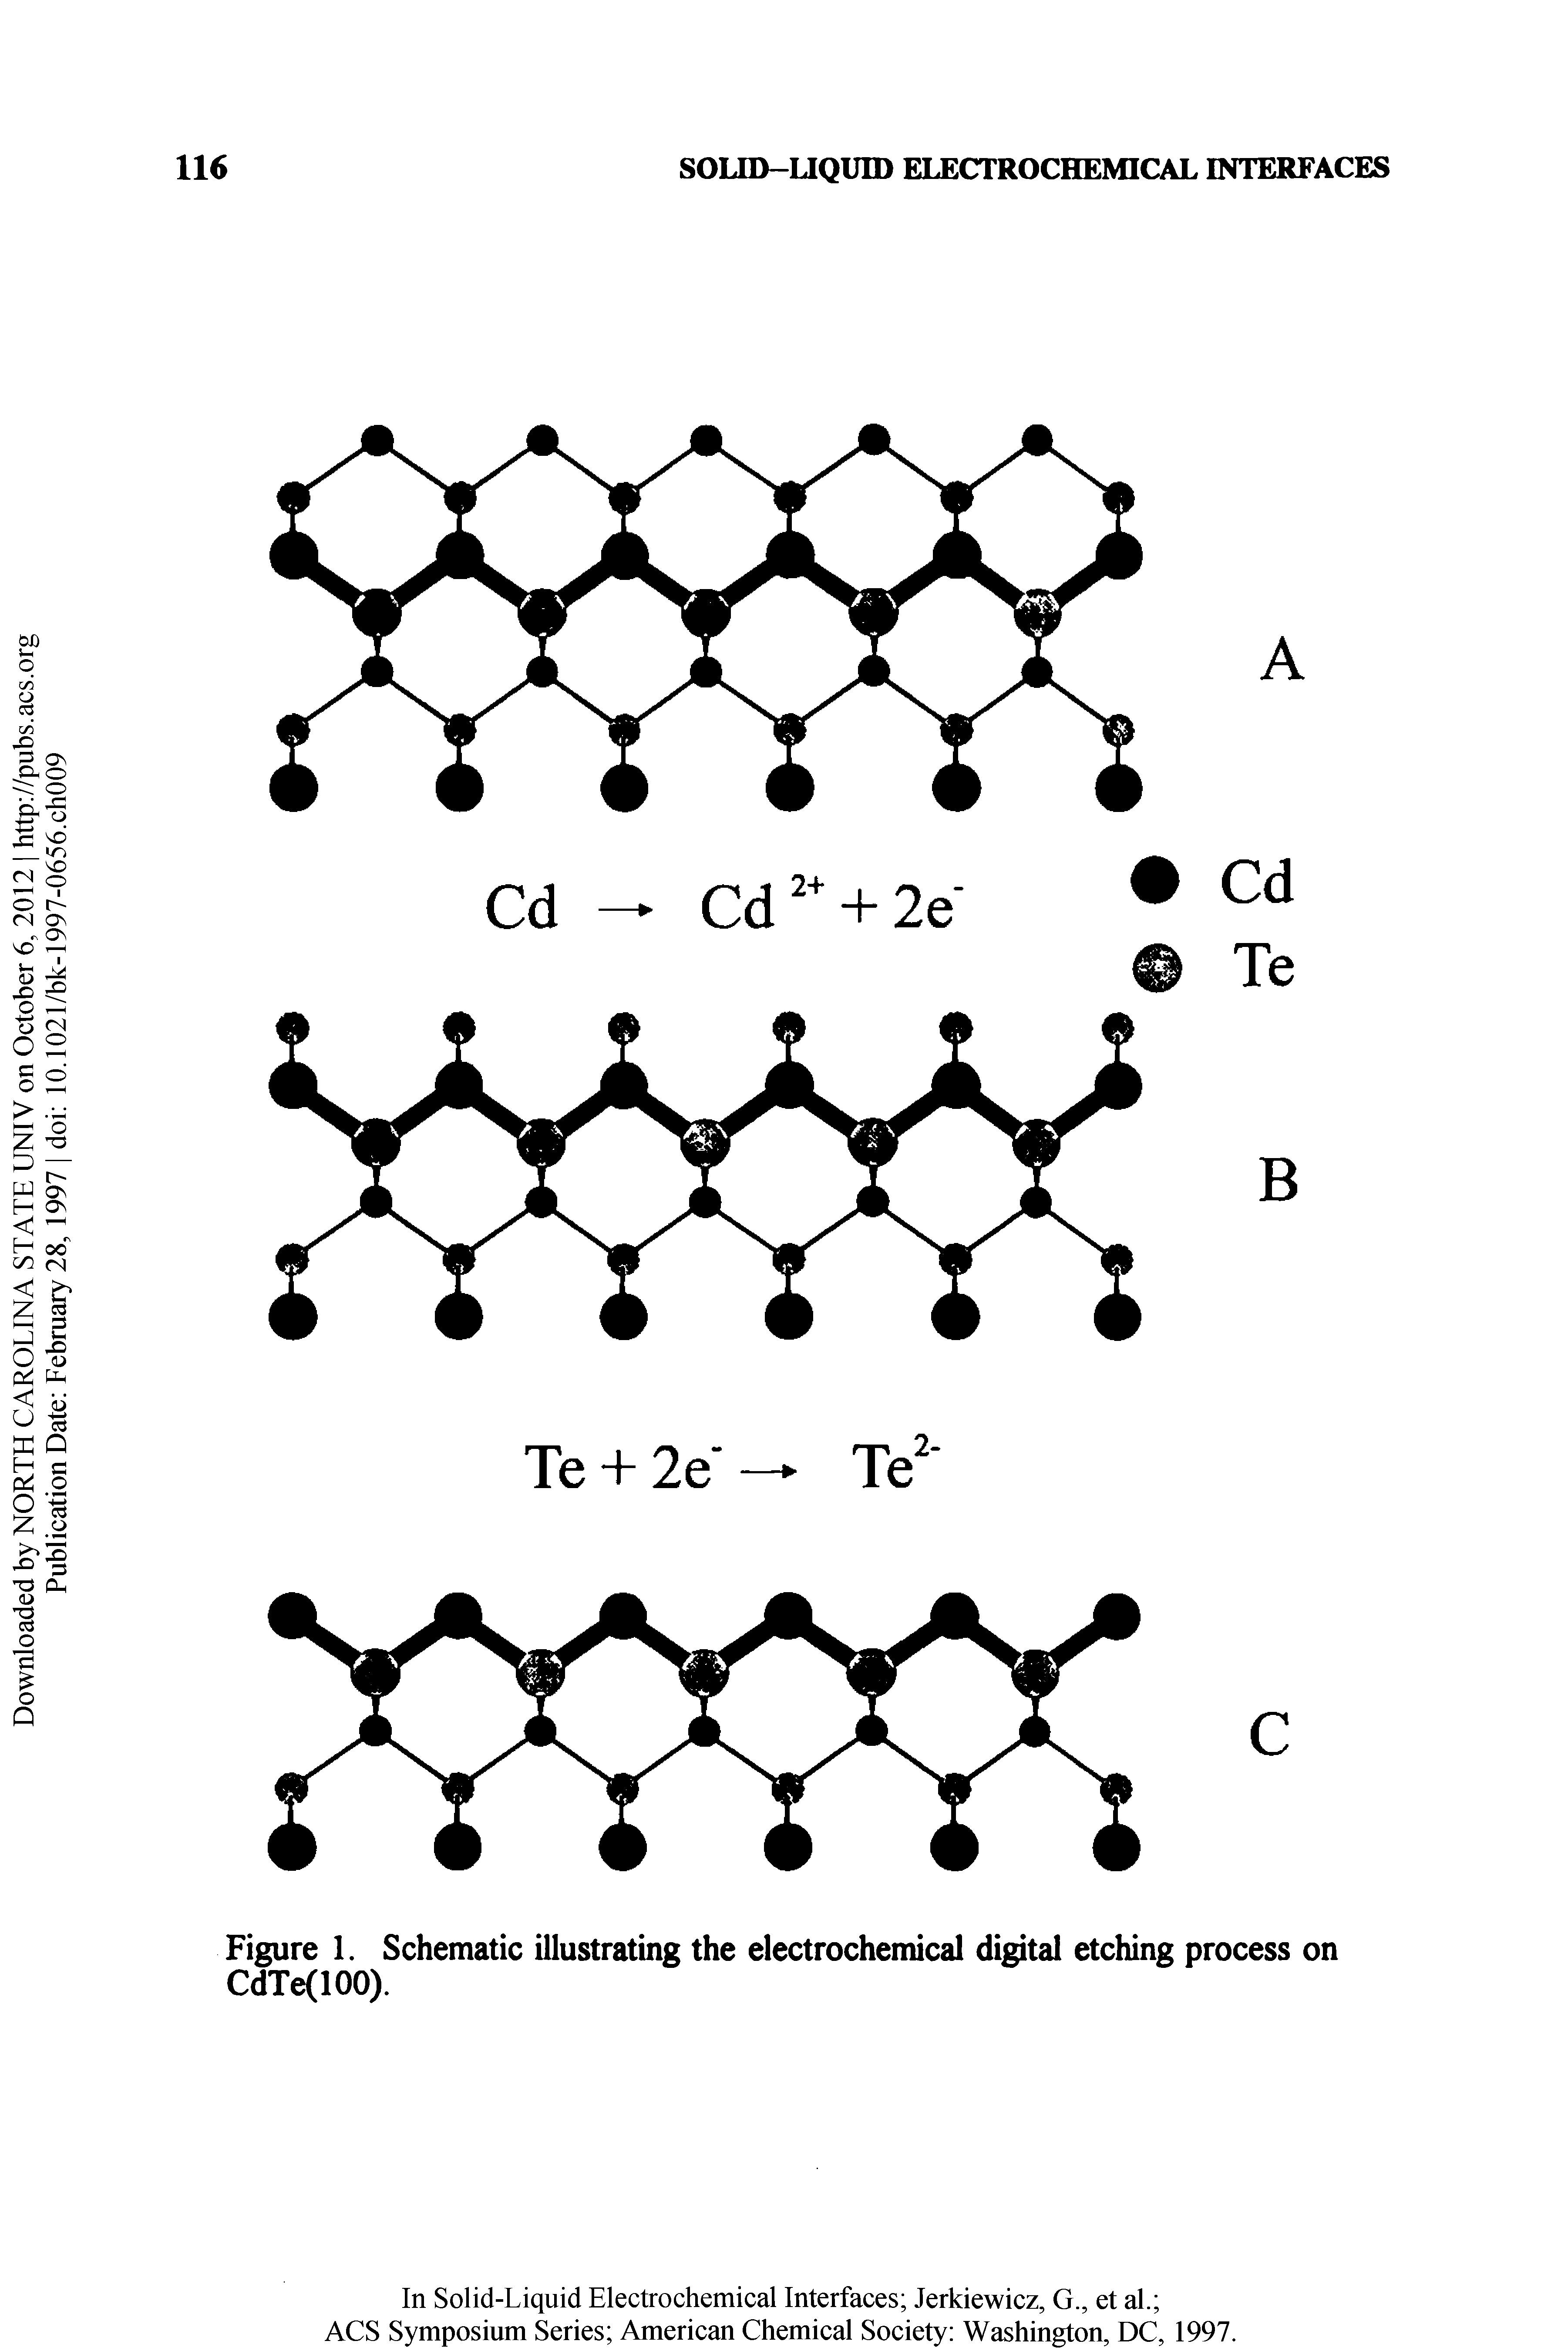 Figure 1. Schematic illustrating the electrochemical digital etching process on CdTe(100).